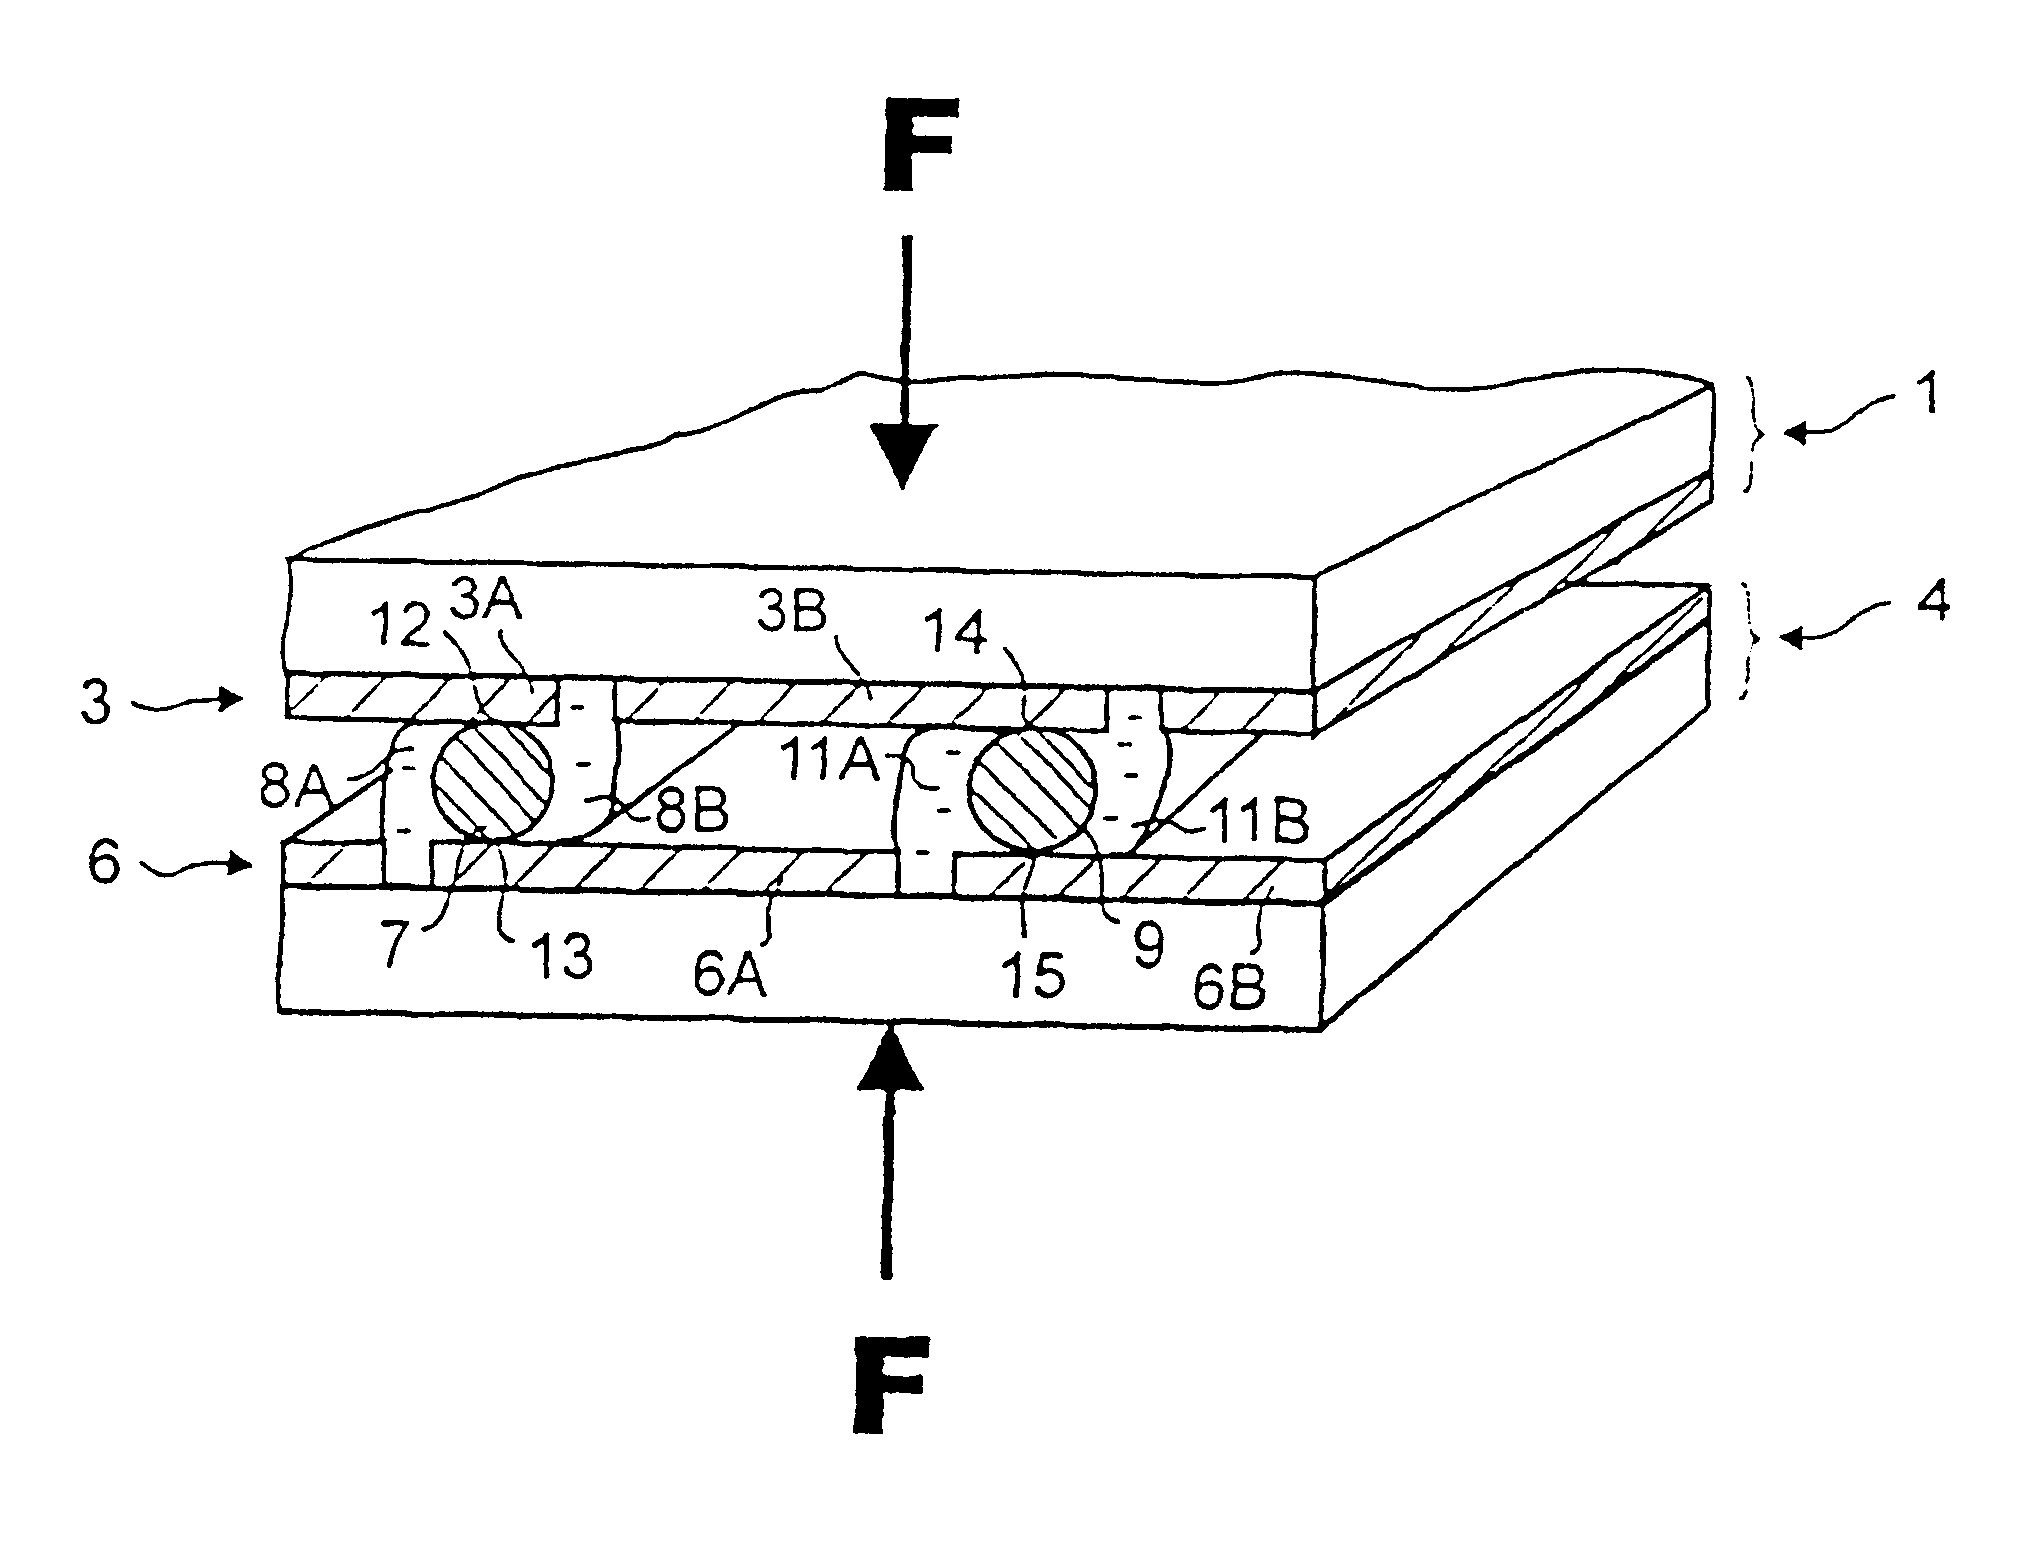 Electric connection of electrochemical and photoelectrochemical cells